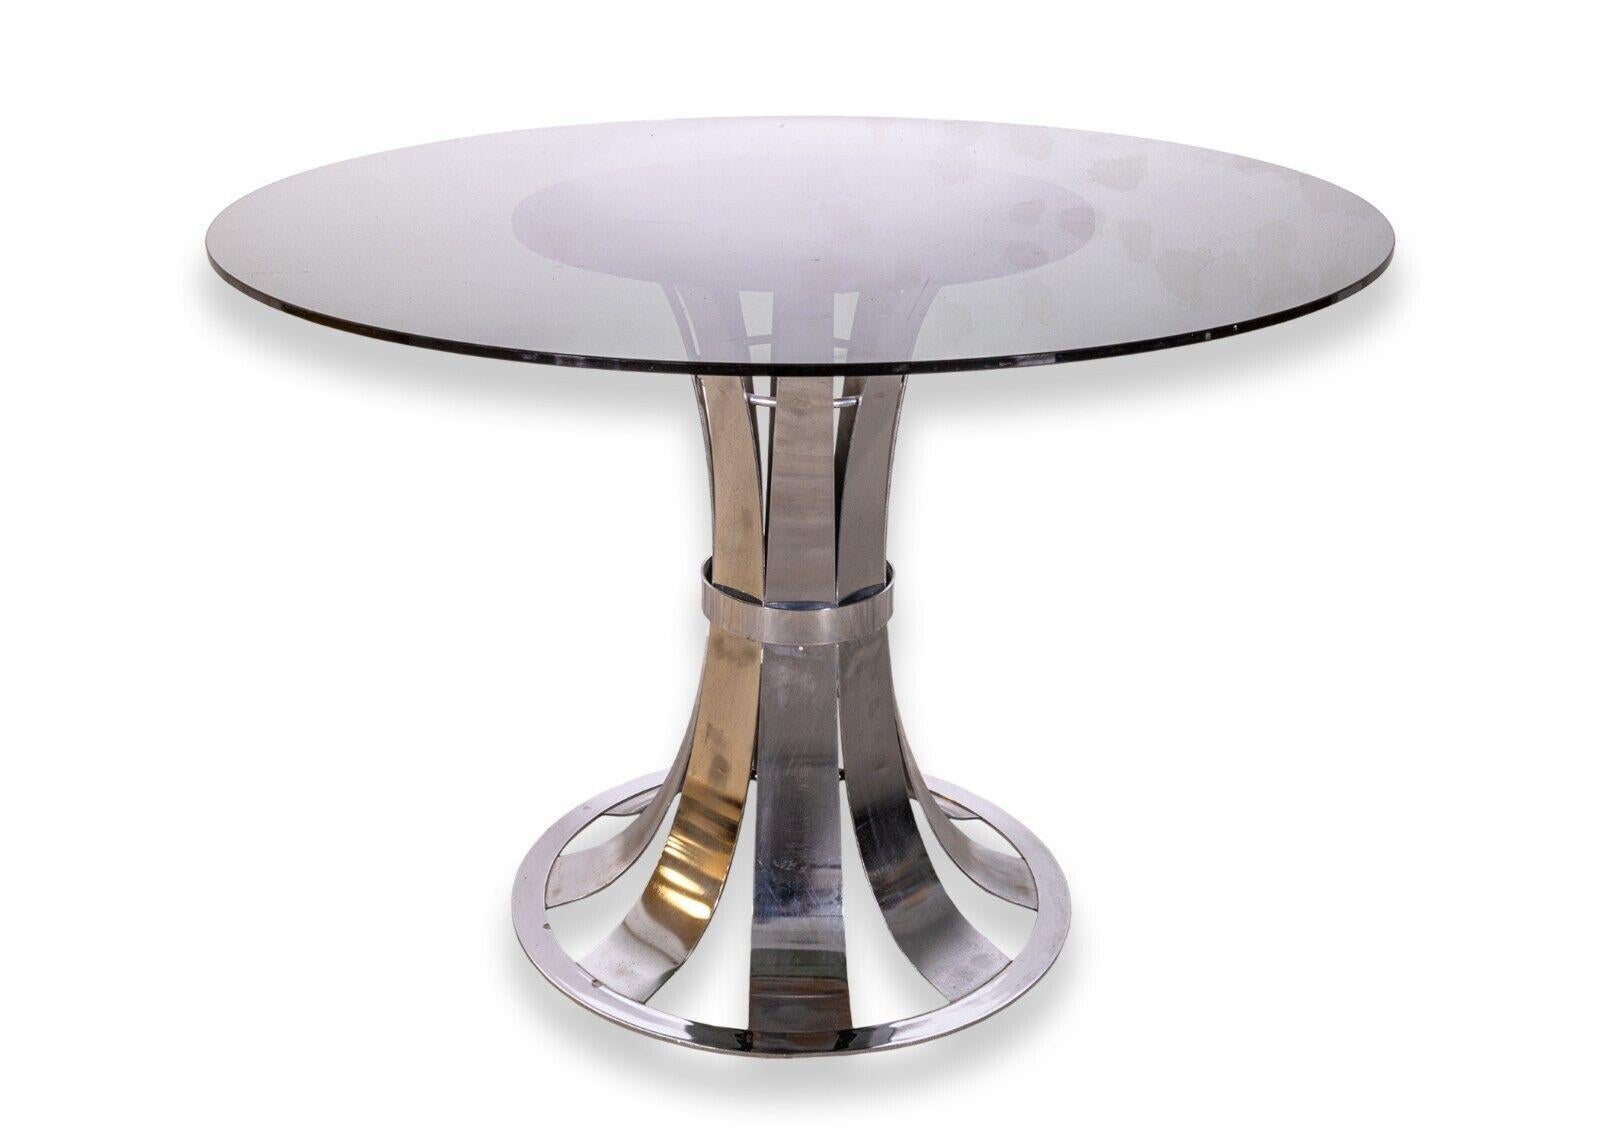 A Russell Woodard polished aluminum dinette set. This is a fantastic mid century modern set of rare Russell Woodard furniture. Known for his patio furniture, this Woodard dinette set is meant for indoor use. This set includes a round, smoked glass